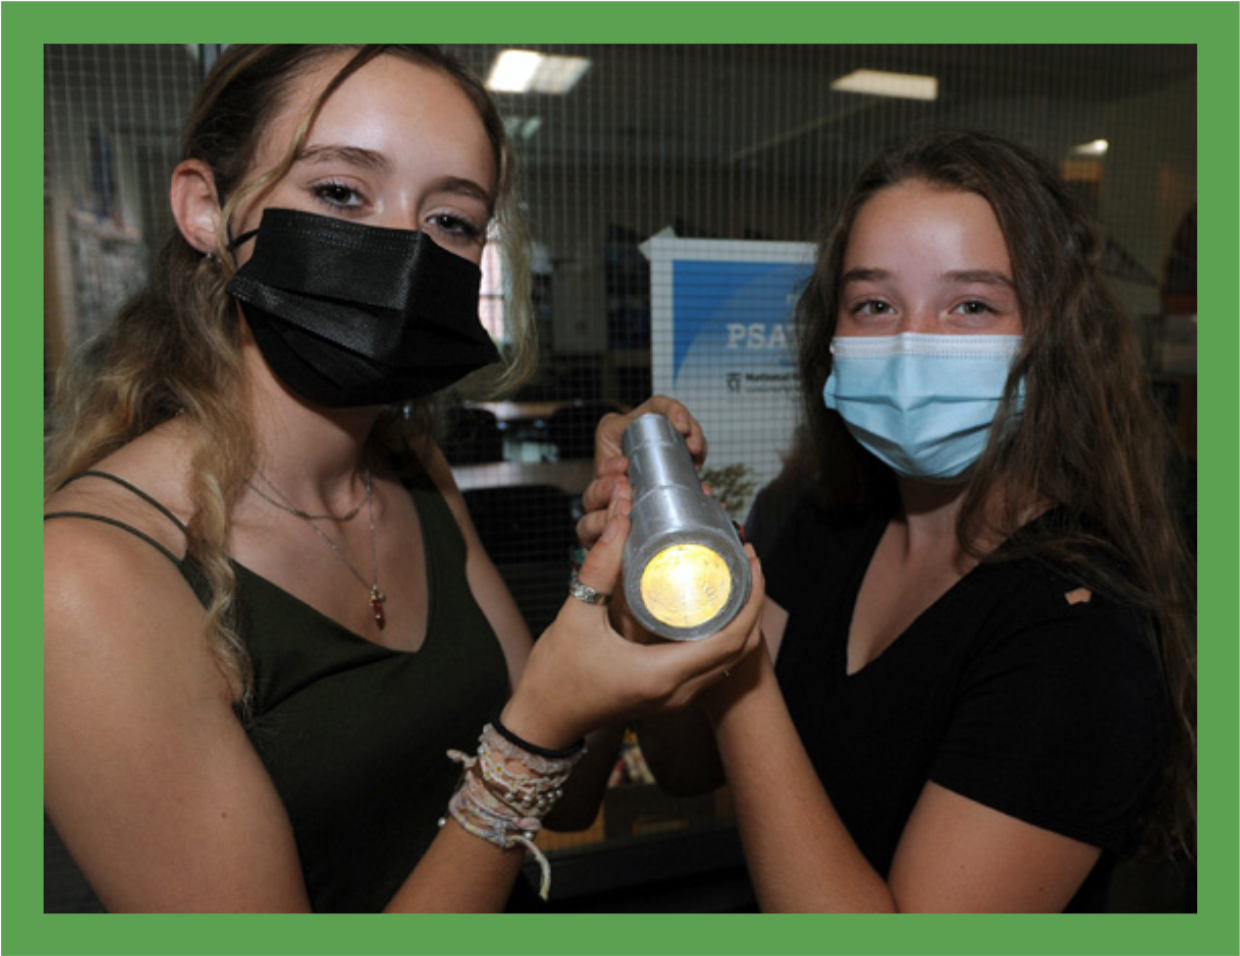 Nicolette and Lauren display their winning invention, Battery Swap, a flashlight that can switch between two battery power sources with a flick of a switch.